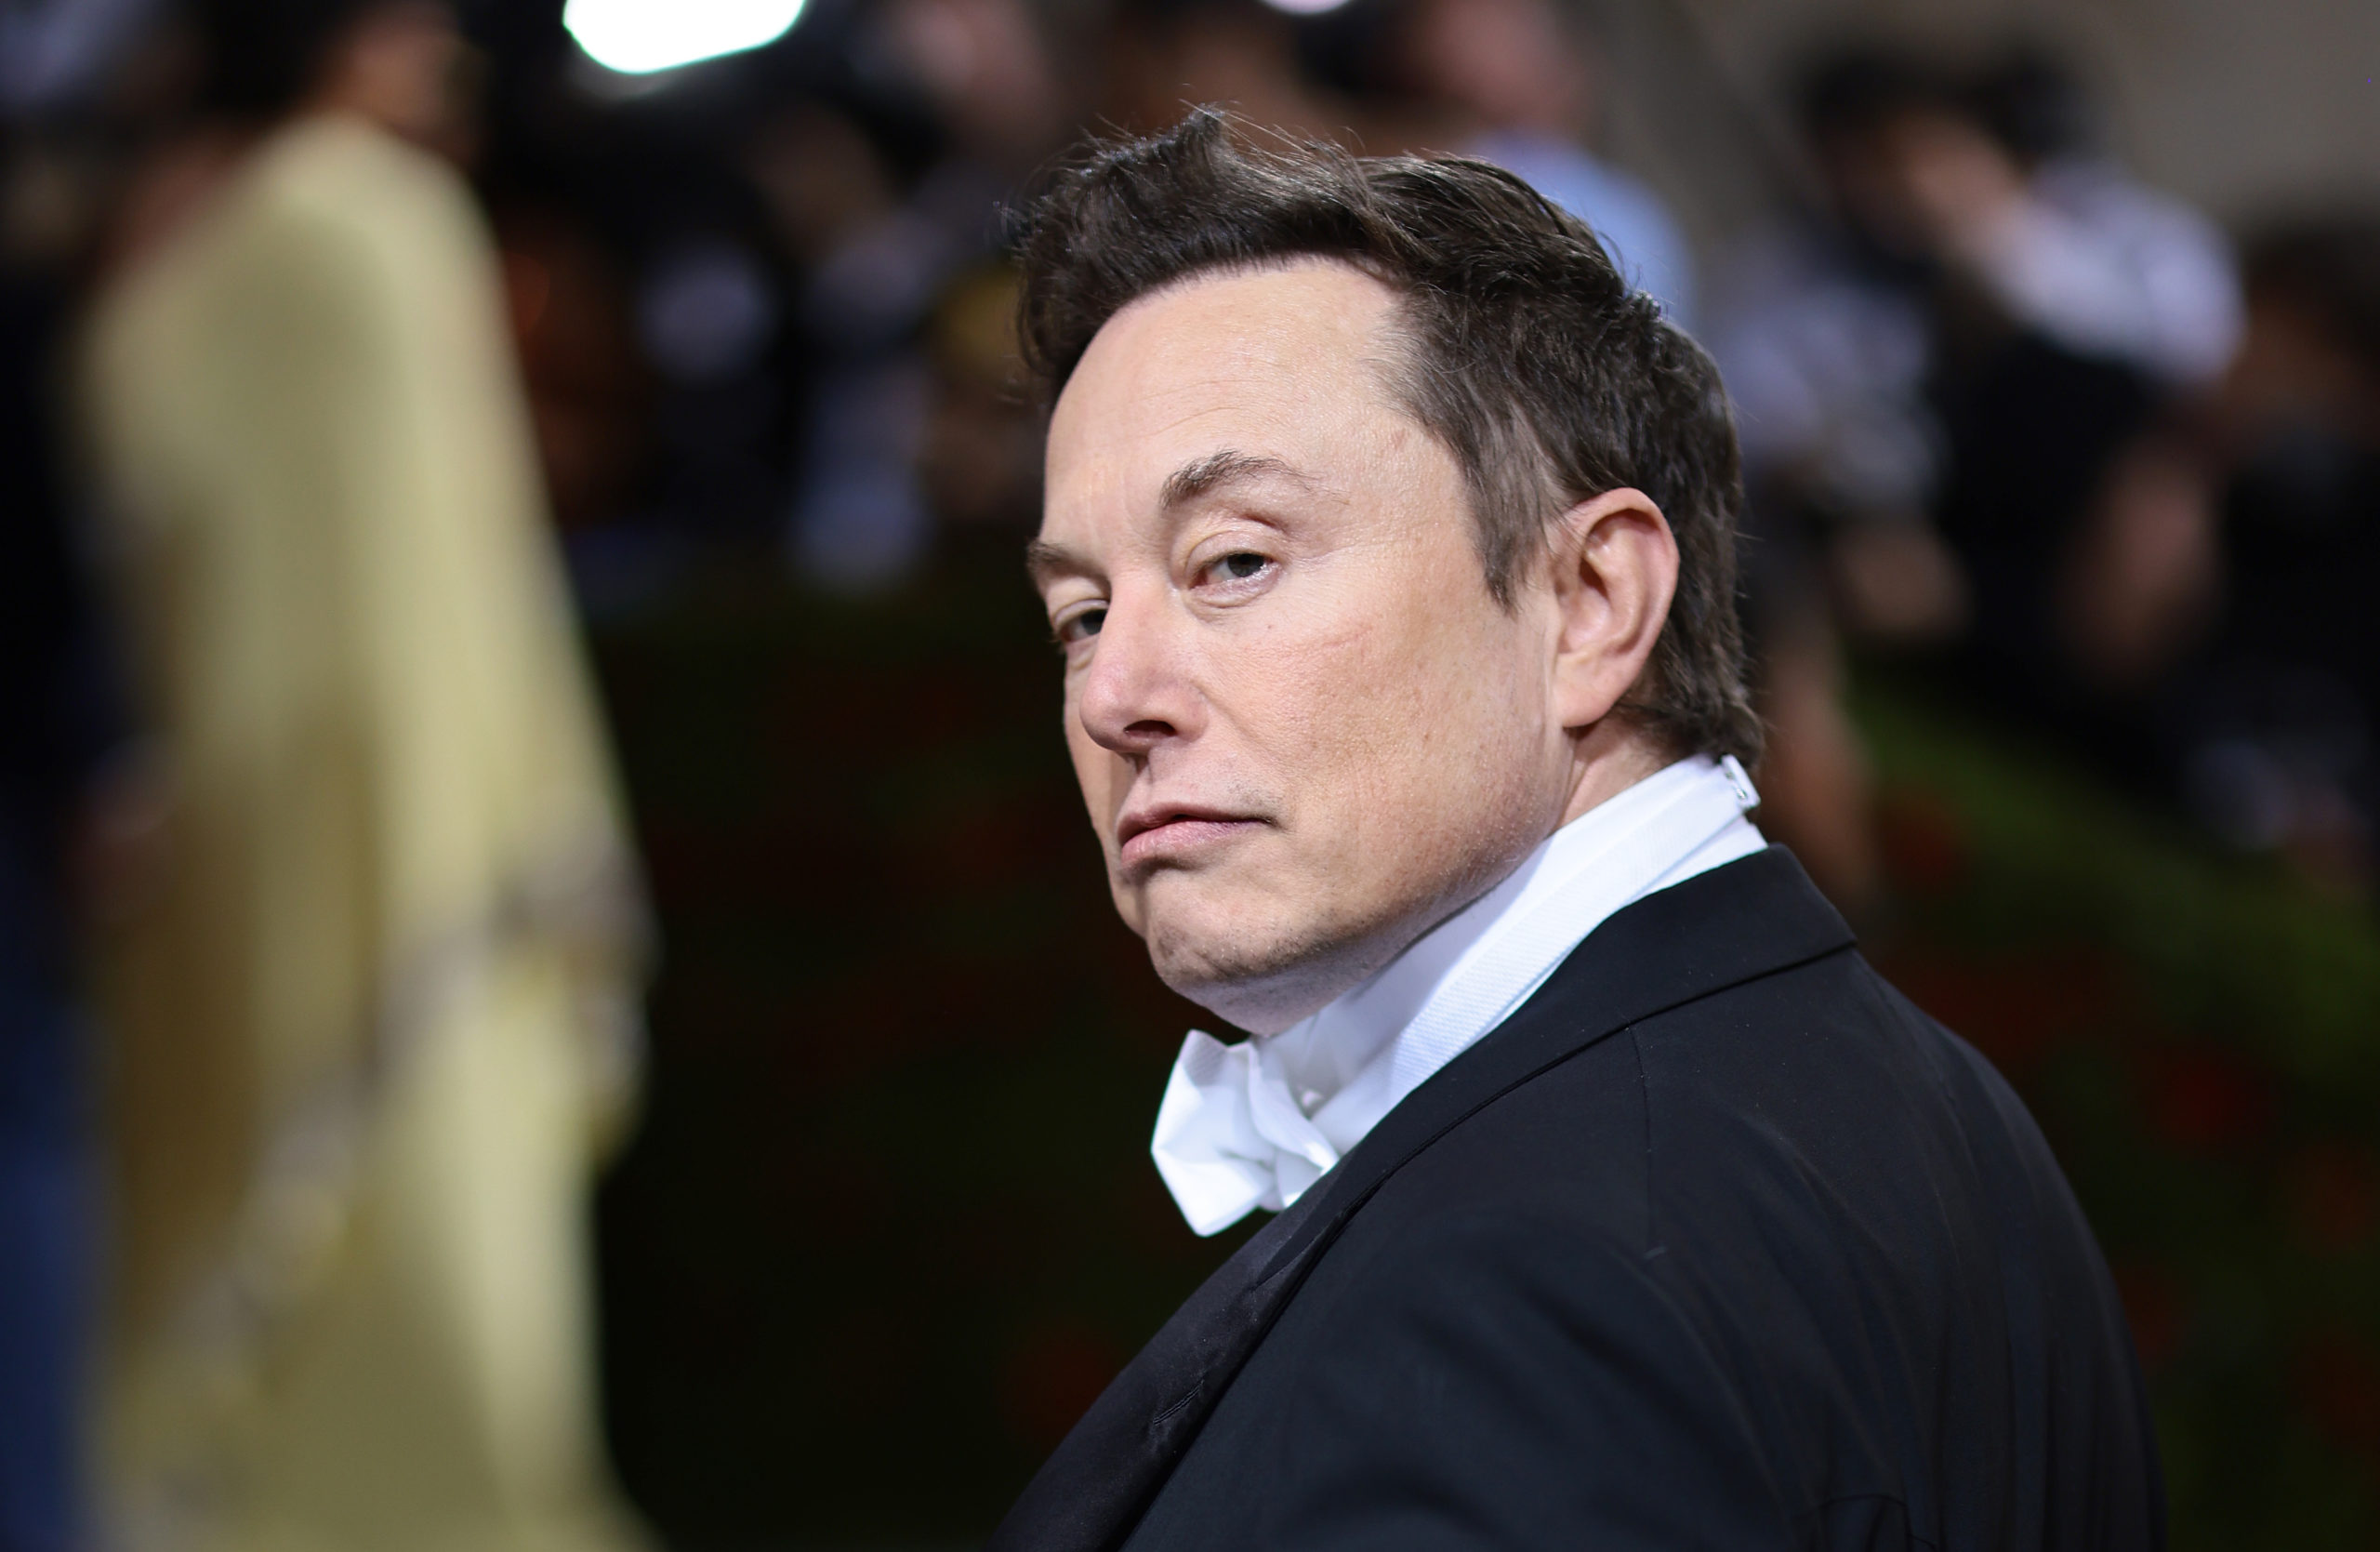 Elon Musk attends The 2022 Met Gala Celebrating "In America: An Anthology of Fashion" at The Metrop...